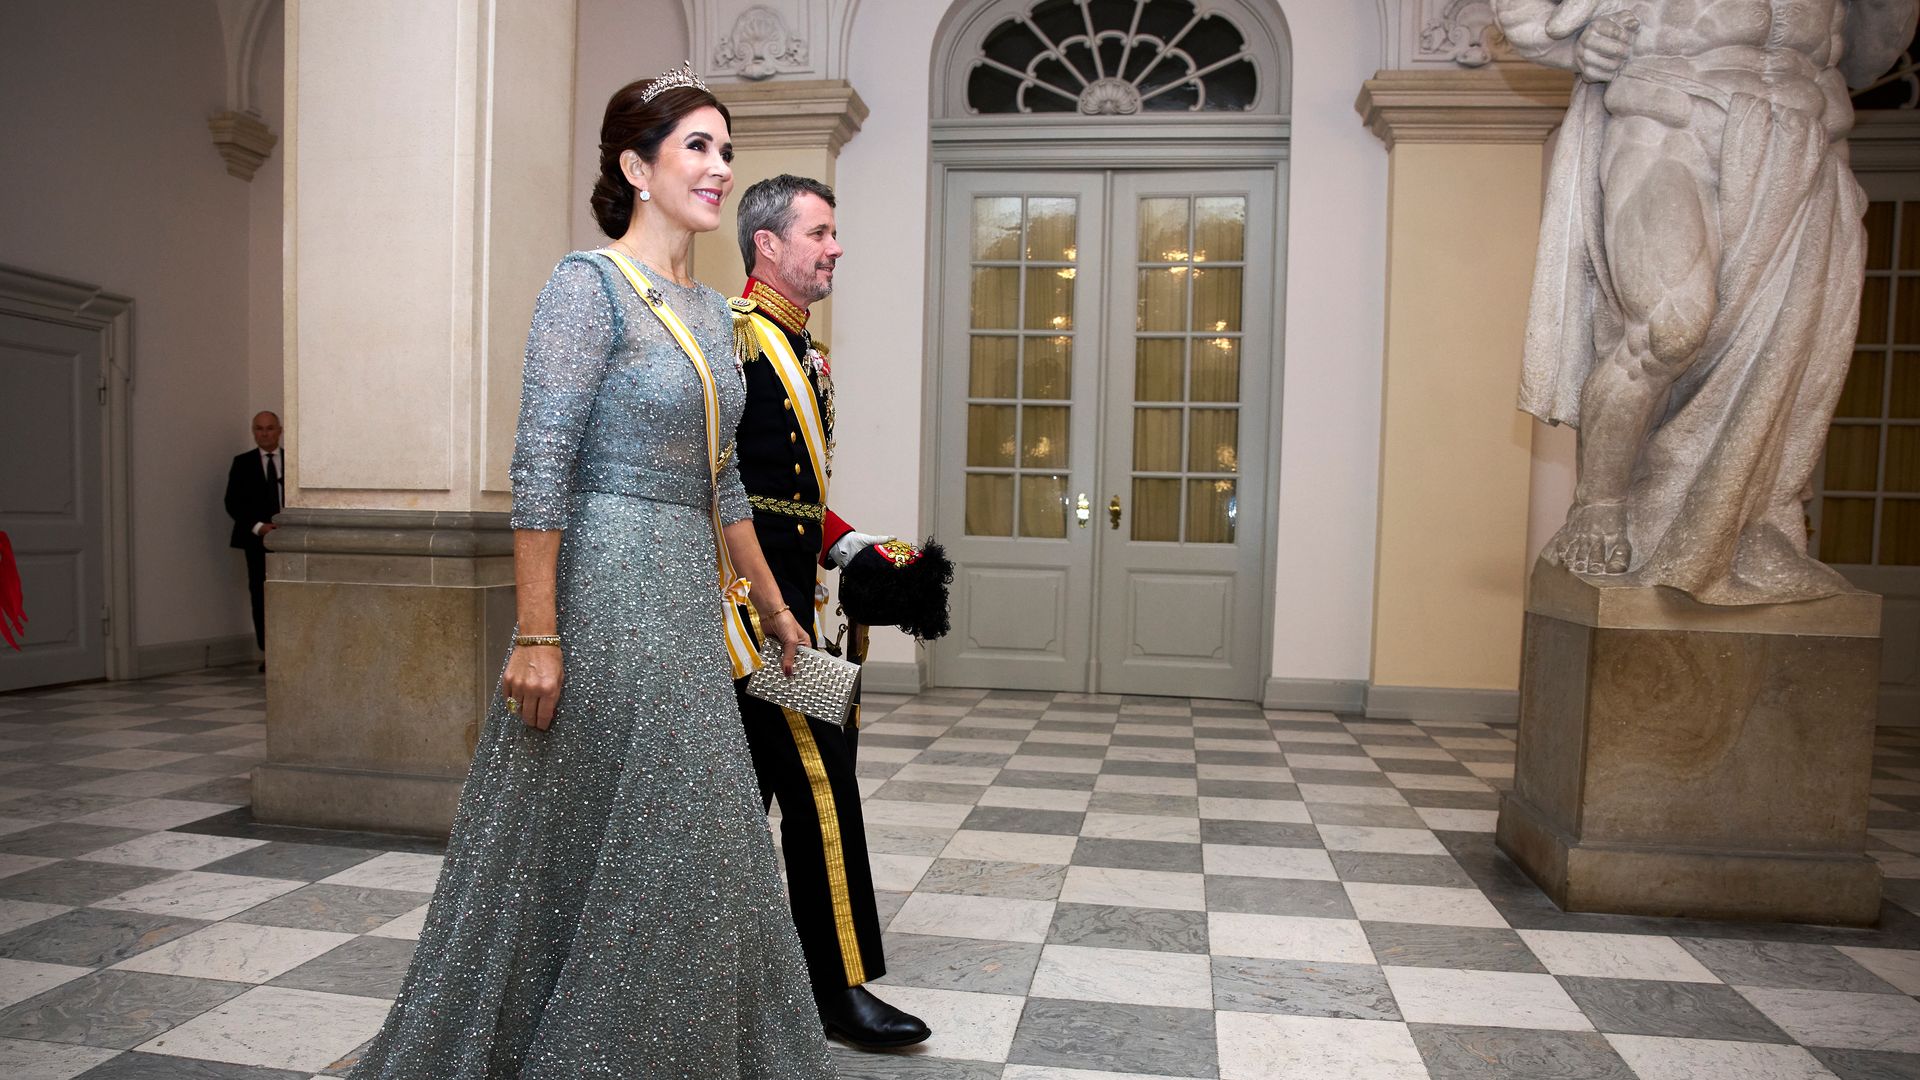 Crown Princess Mary opted for a blue beaded dress by Lasse Spangenberg